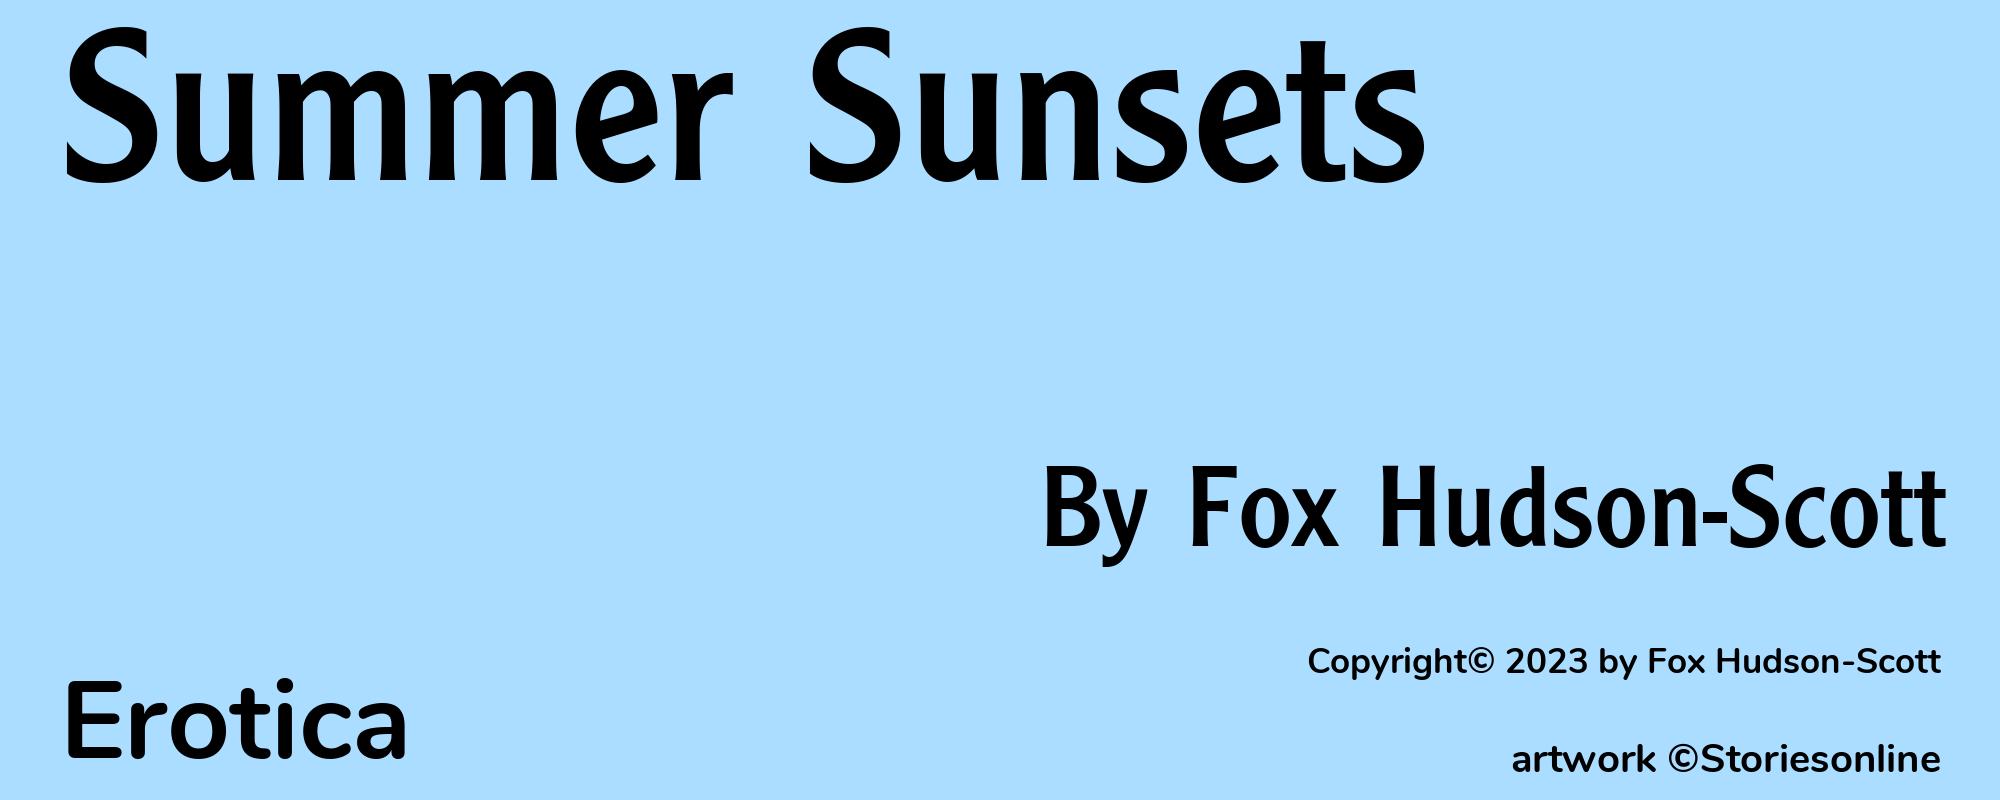 Summer Sunsets - Cover